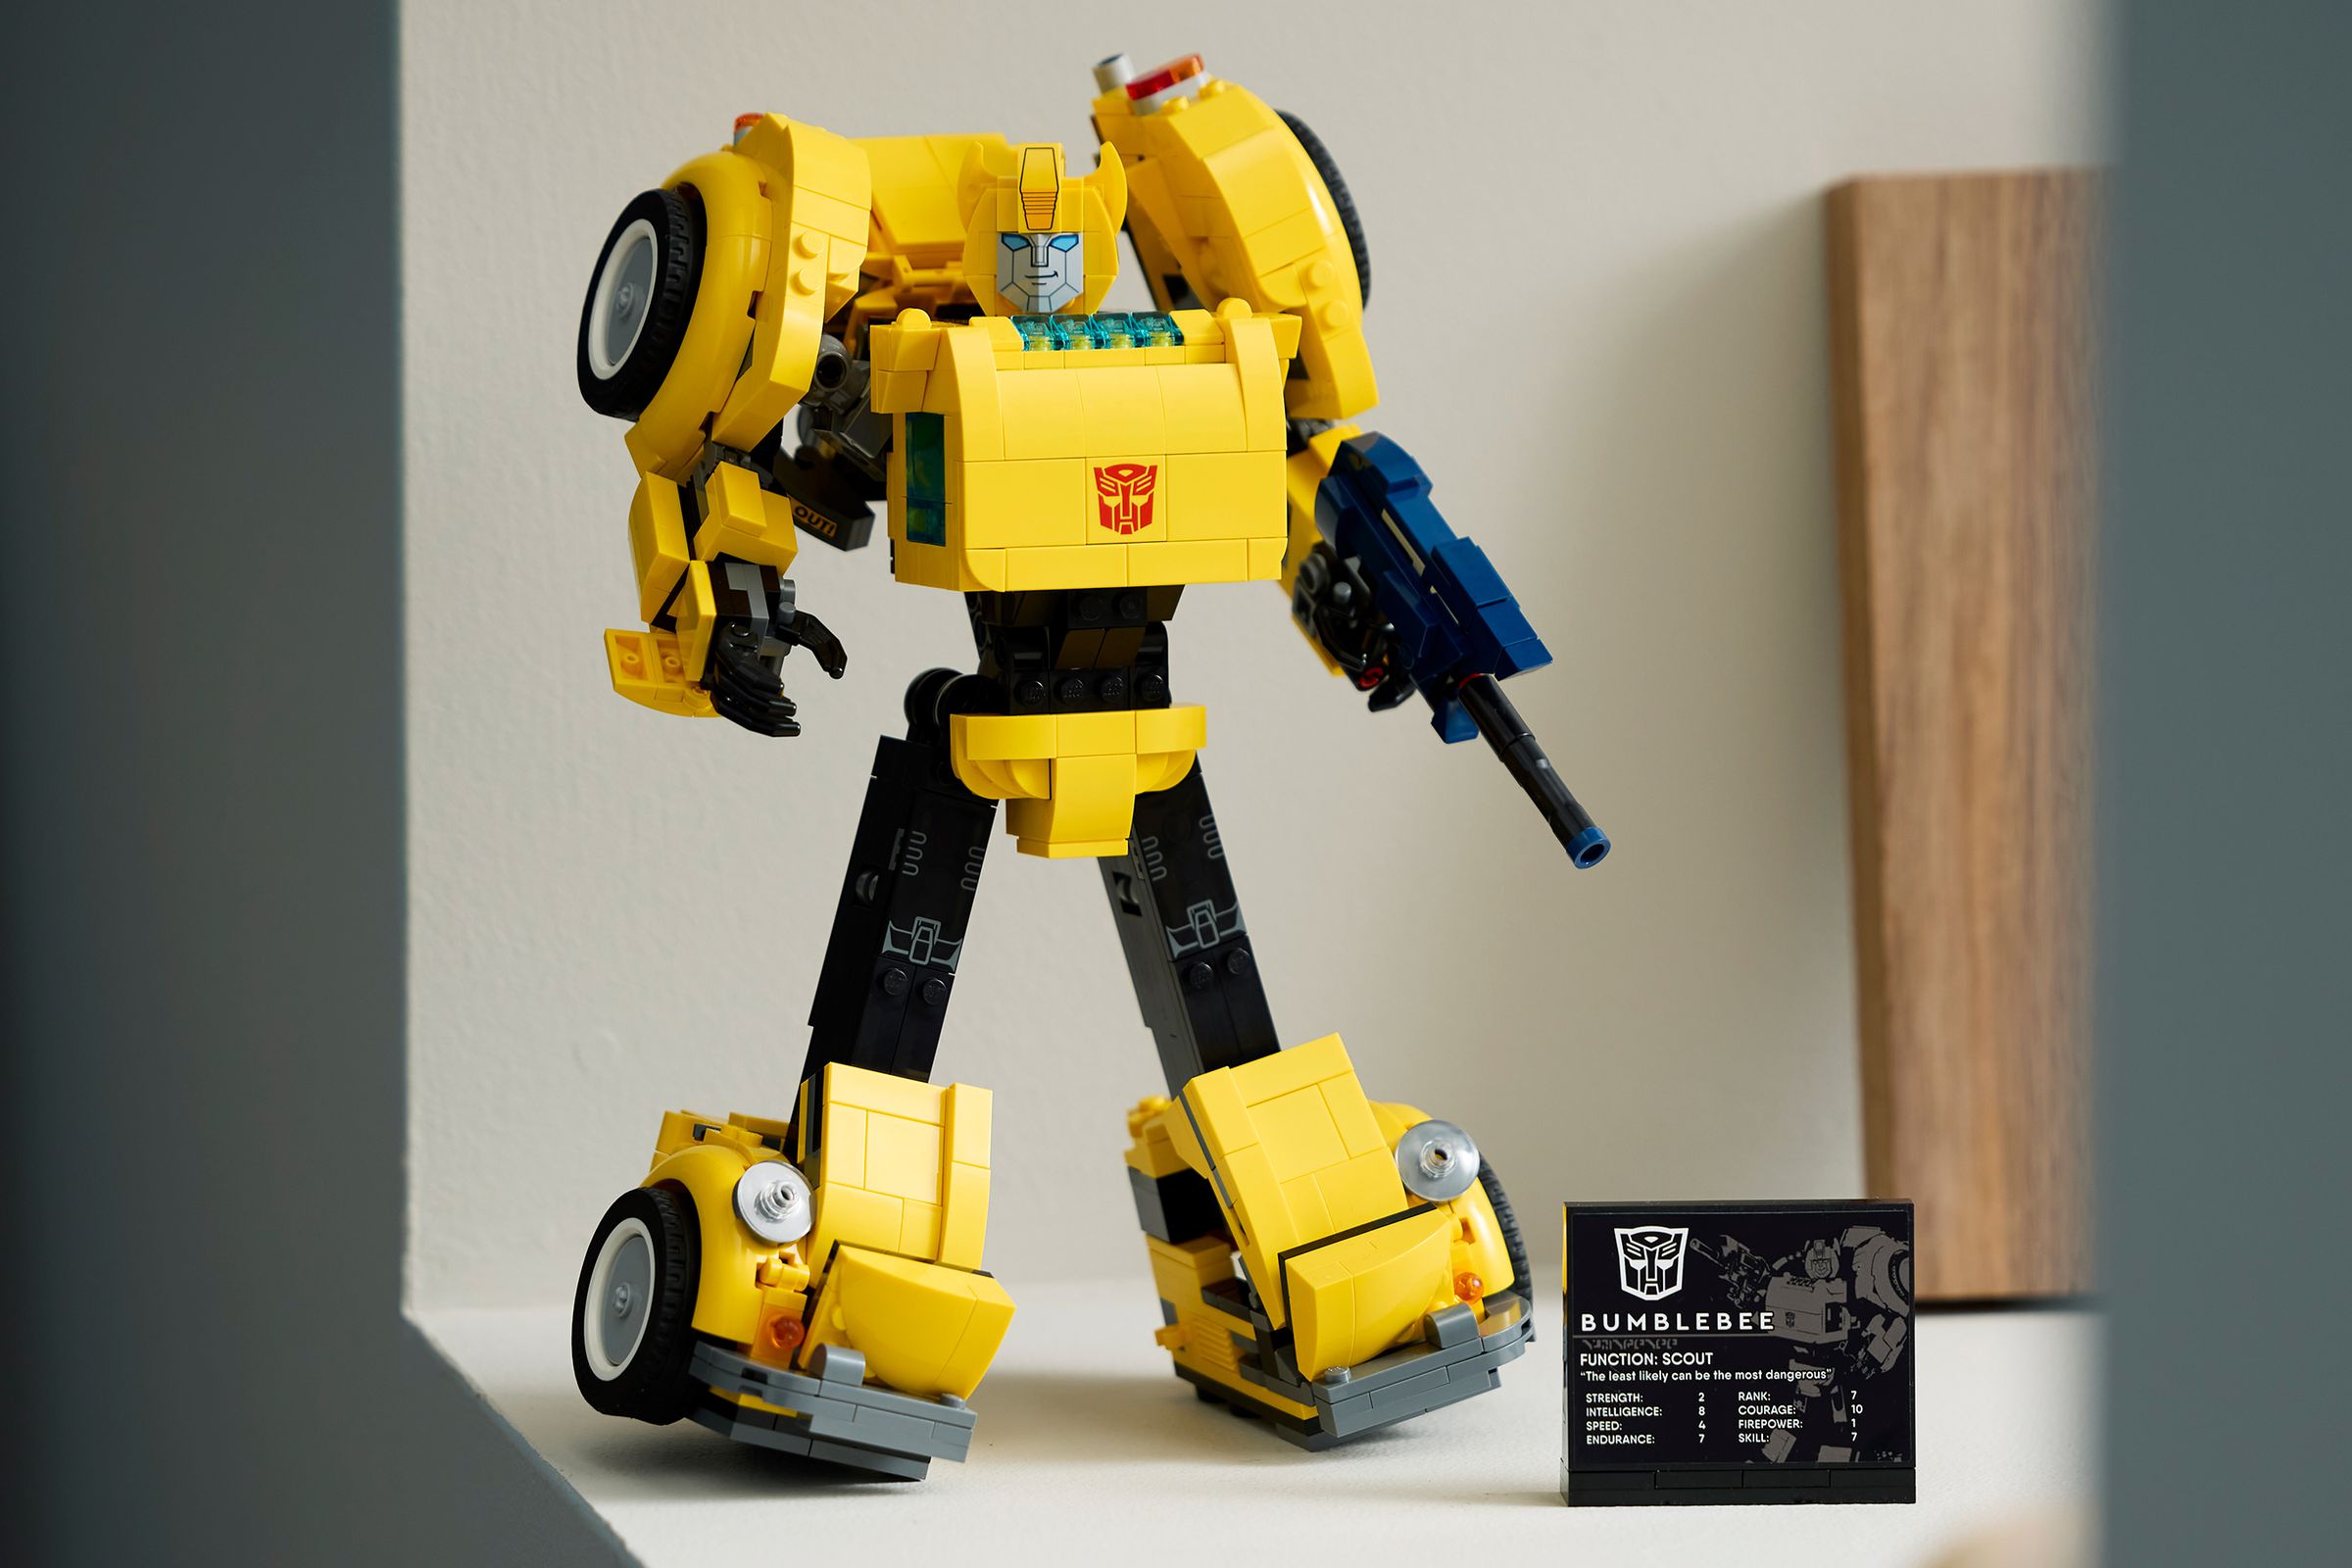 Lego’s Bumblebee model standing in robot mode next to a display plaque.